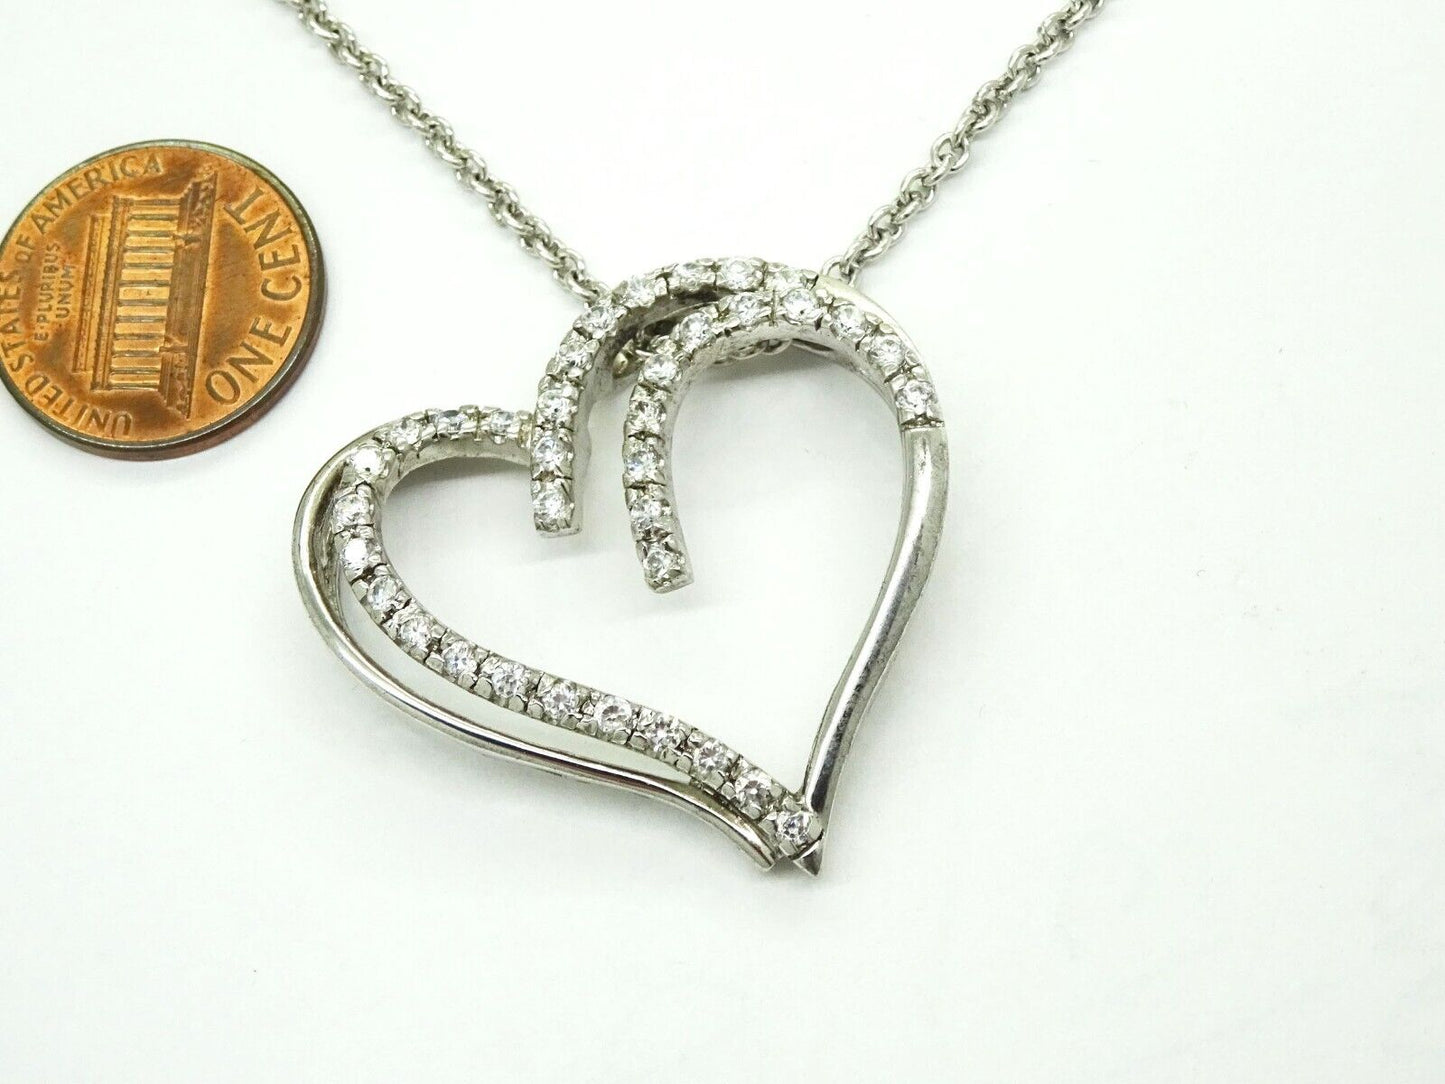 Big Open Heart CZ Pendant Chain Necklace Sterling Silver